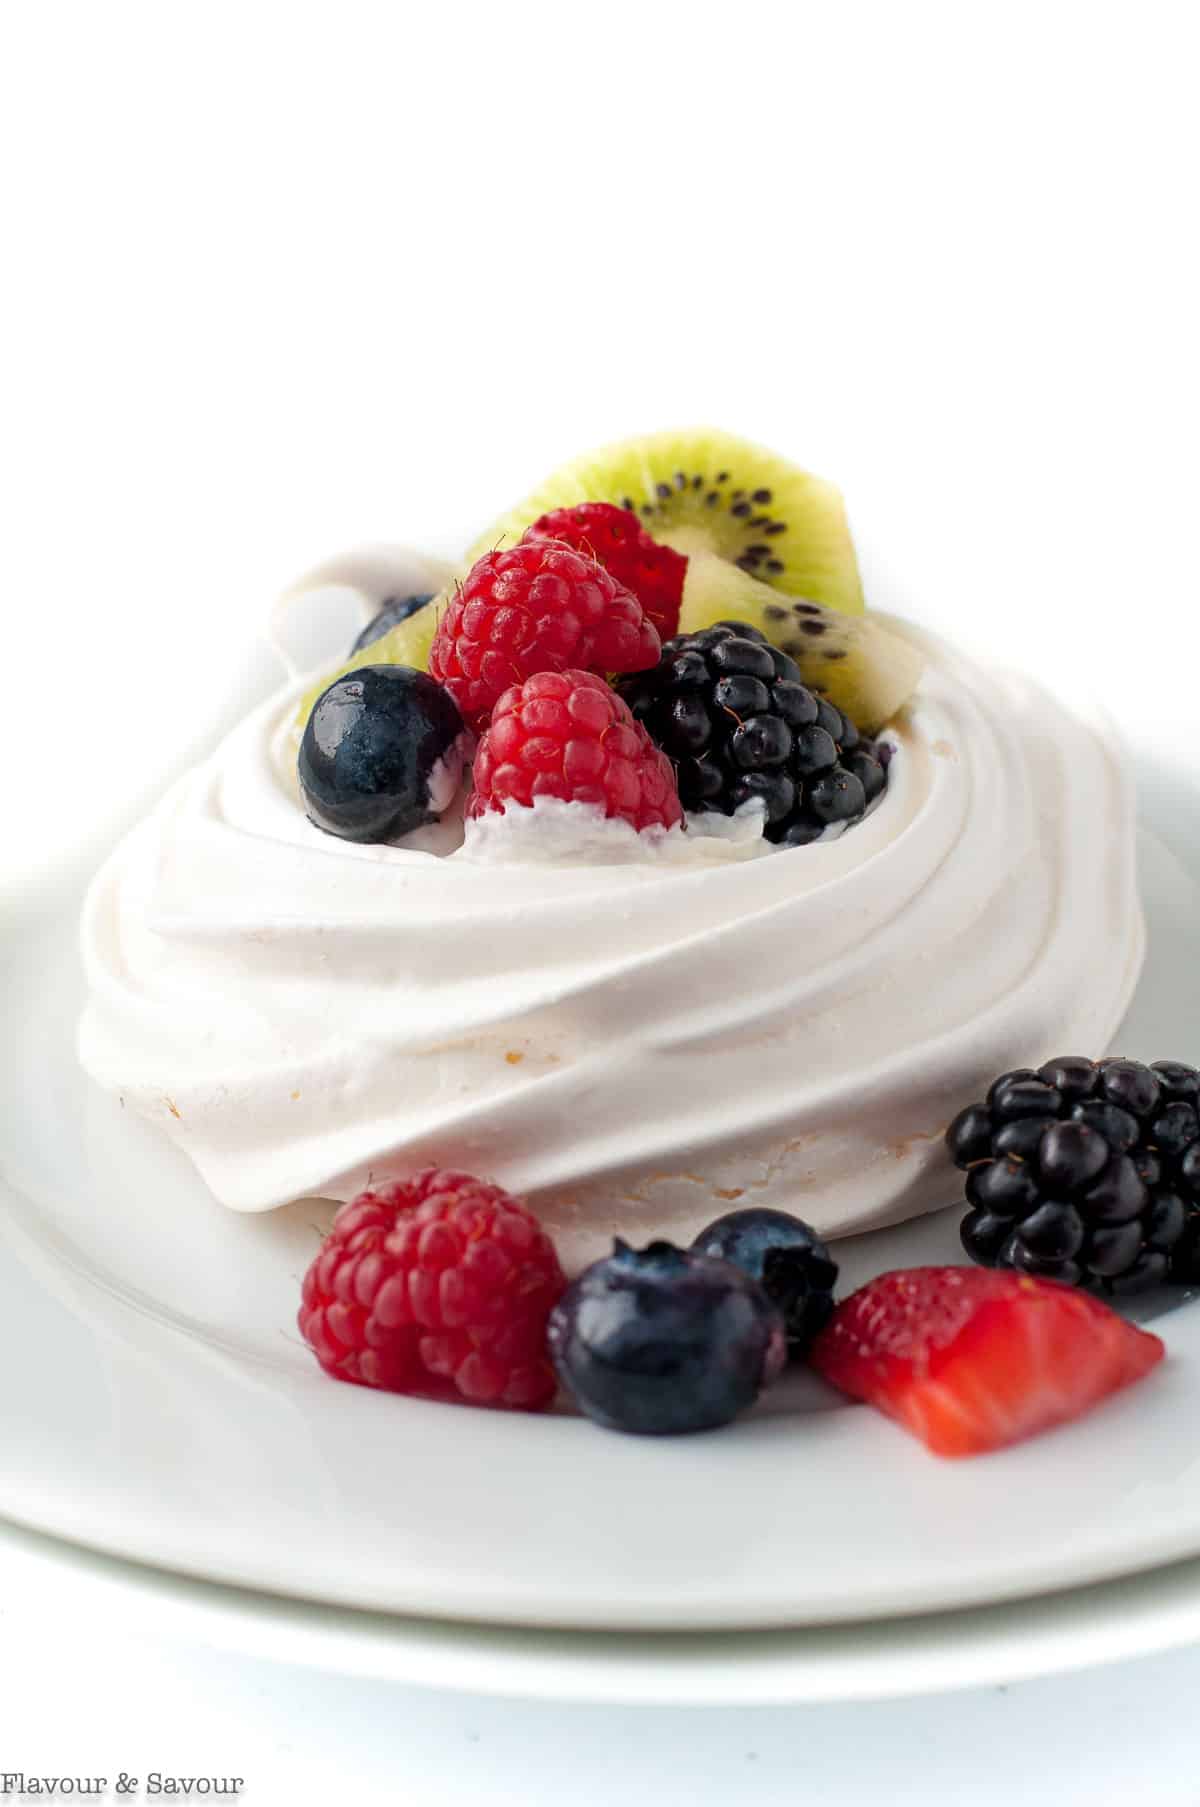 Close up view of pavlova with blueberries, blackberries, strawberries and kiwi.